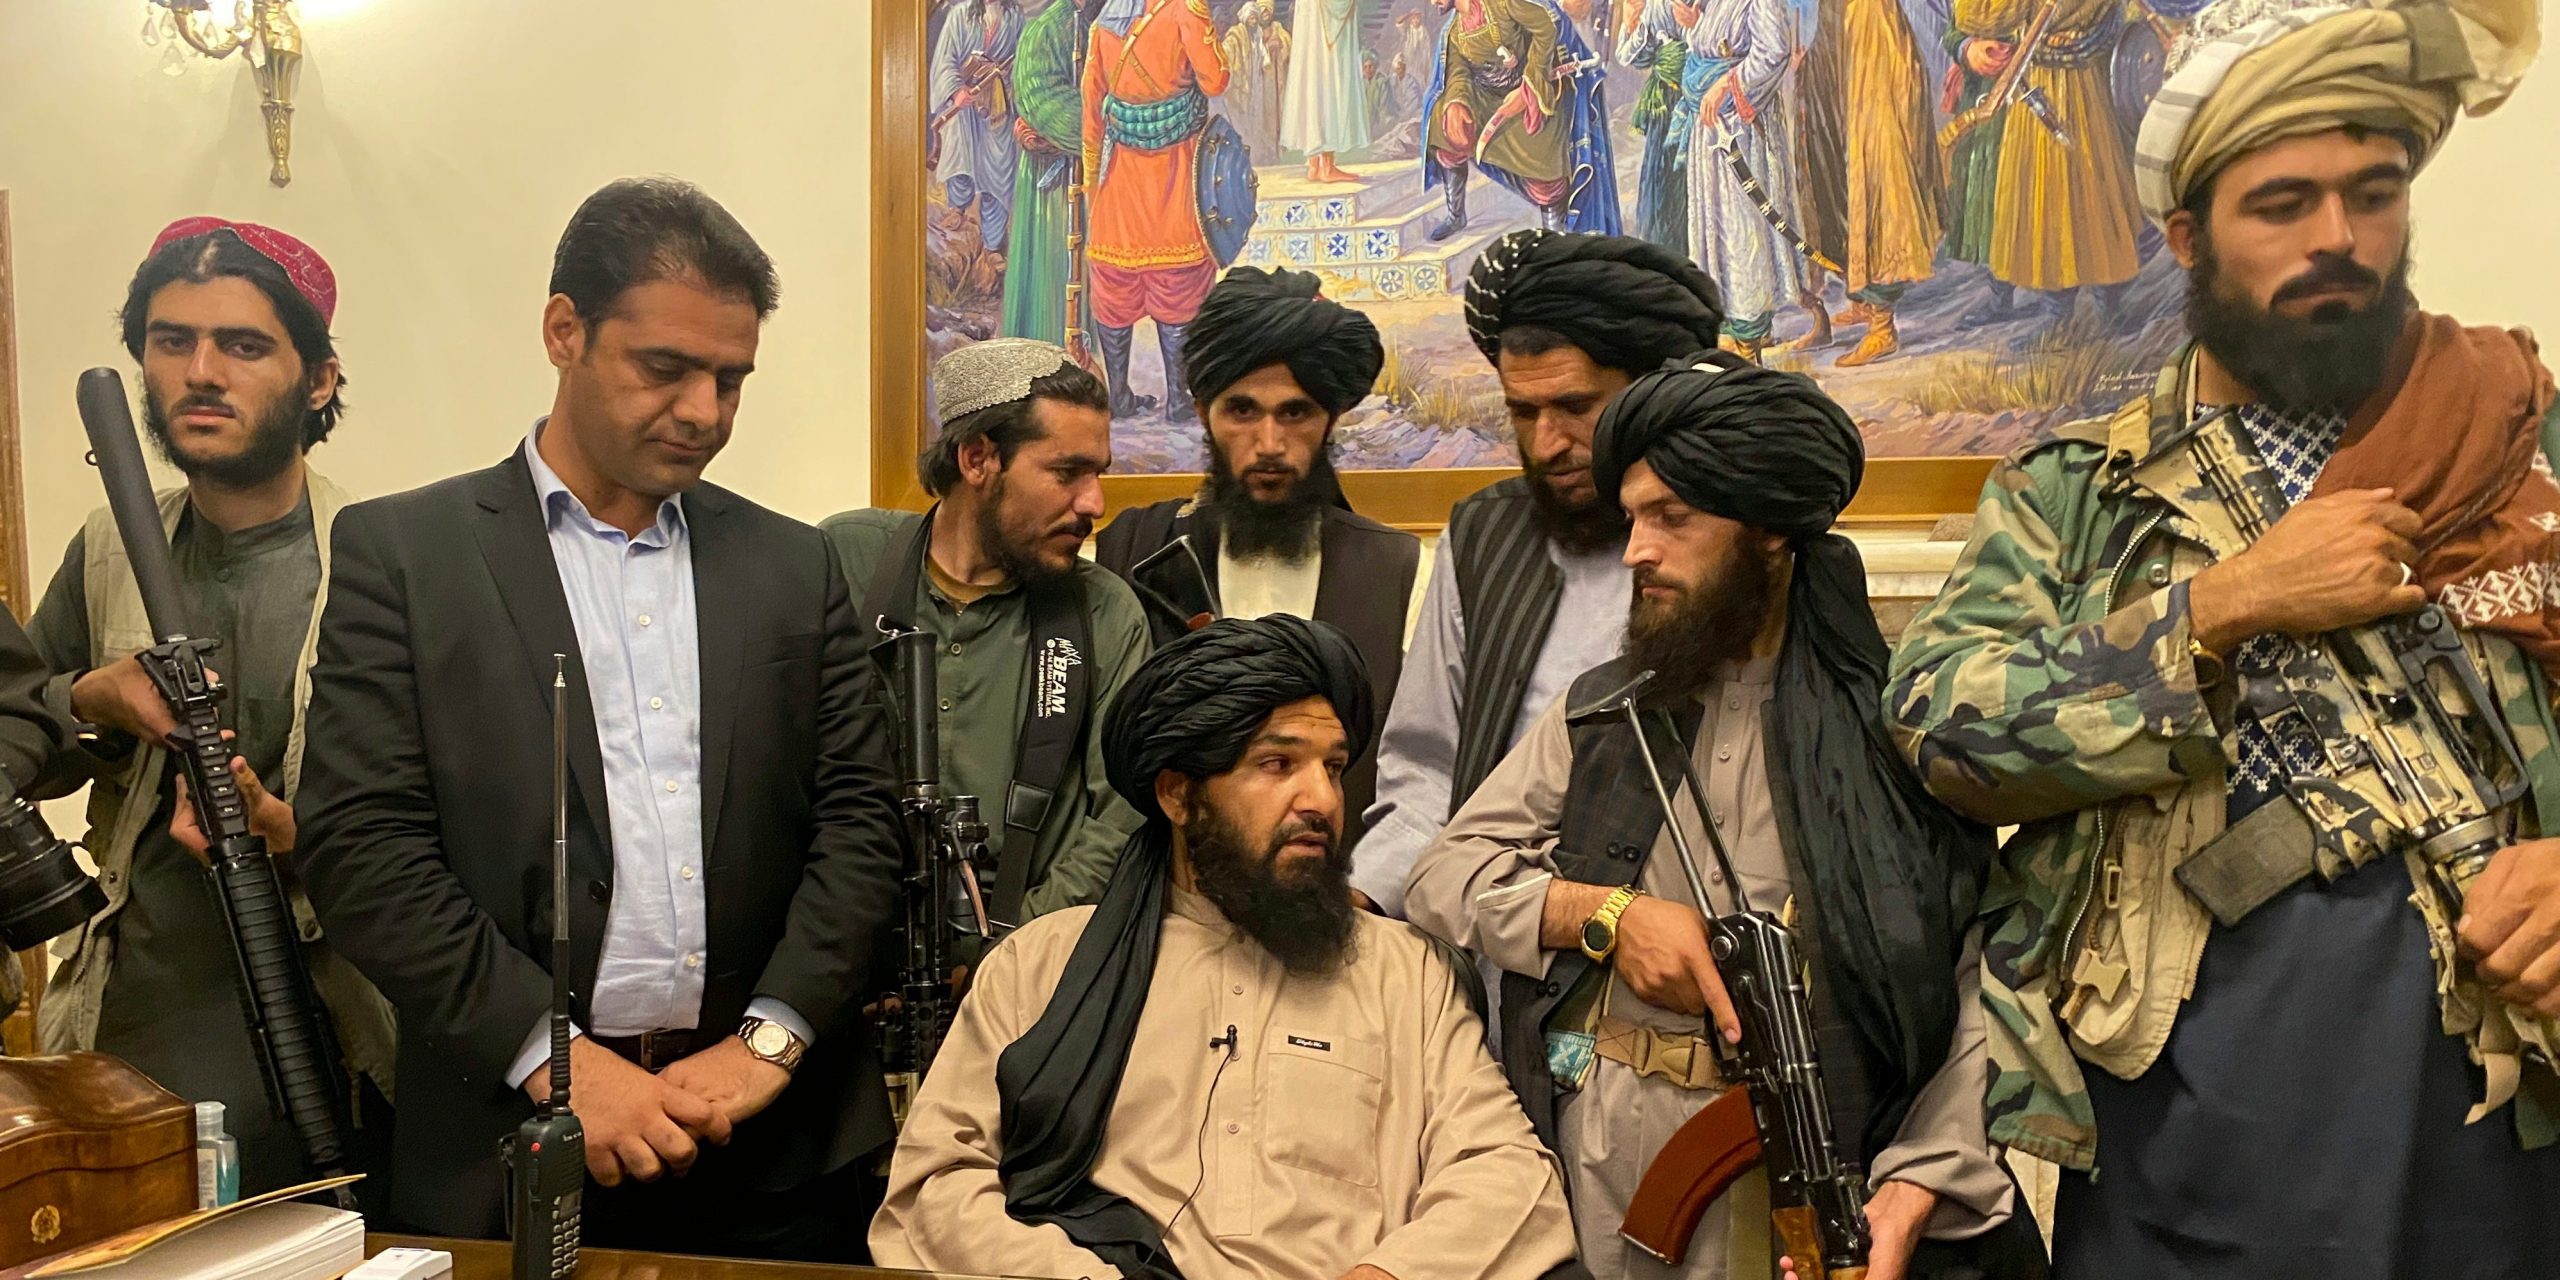 Taliban fighters sit in the Afghan presidential palace.